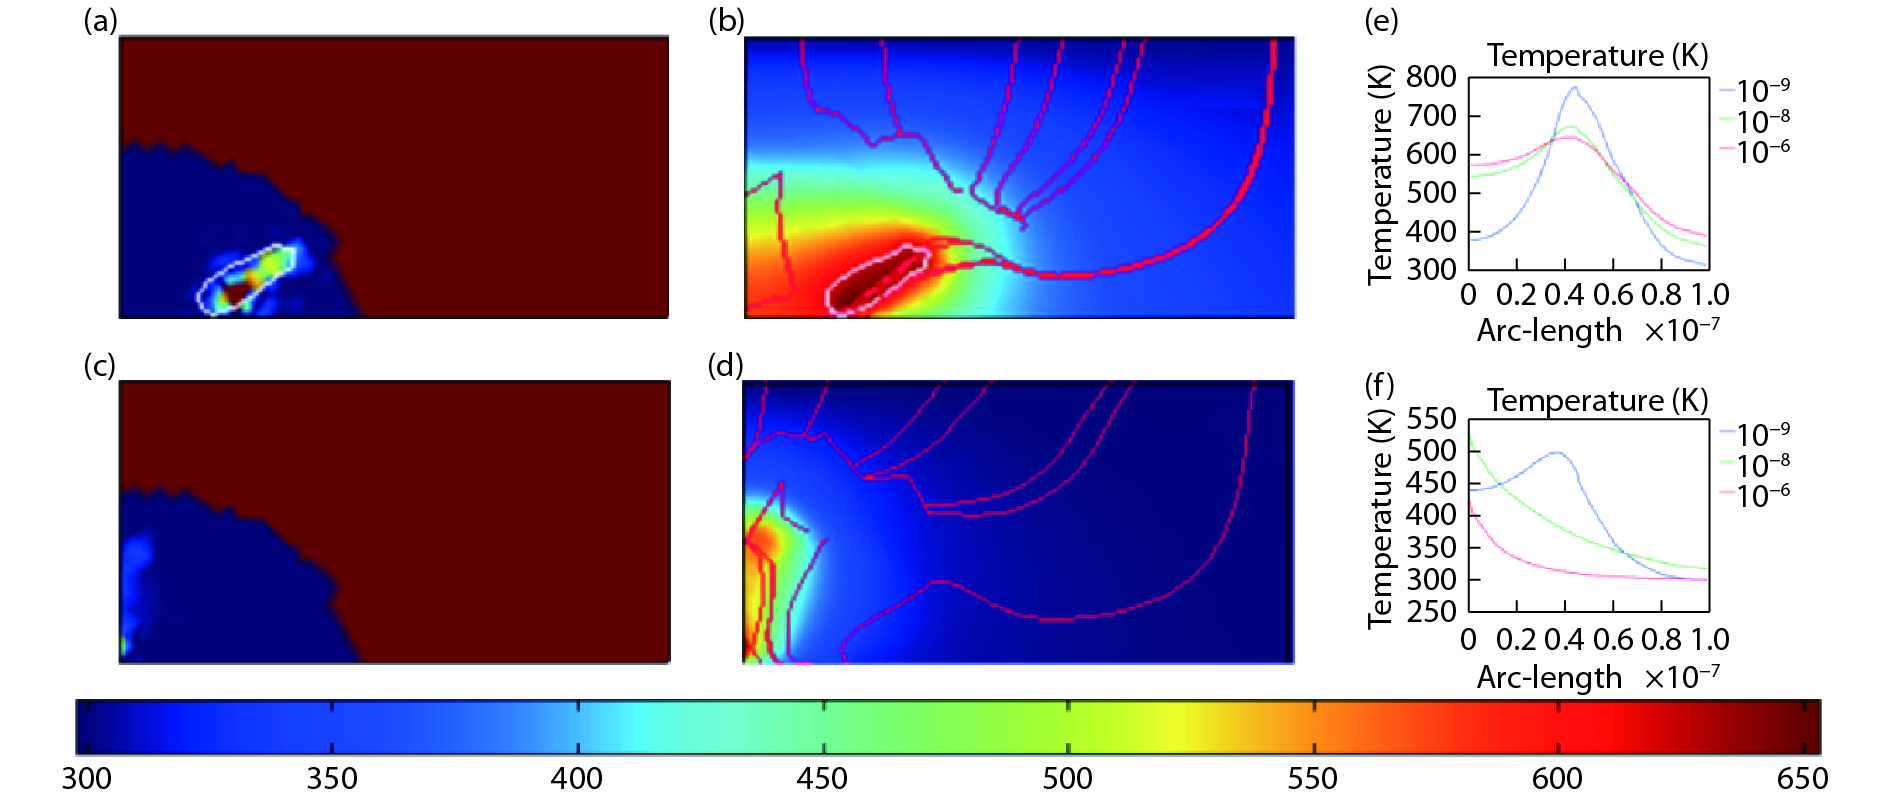 (Color online) The crystalline domain (light color) among amorphous phase (dark blue) under current pulses of (a) 0.5 mA/1 μs and (b) 0.01 mA/1 μs; the temperature distributions and current density distributions under current pulses of (c) 0.5 mA/1 μs and (d) 0.01 mA/1 μs; the temperature values along horizontal direction (r-axis) under current pulses of (e) 0.5 mA/1 μs and (f) 0.01 mA/1 μs, the time points vary from 1 ns (blue line) to 1 μs (red line), the median time point is 10 ns (green line).